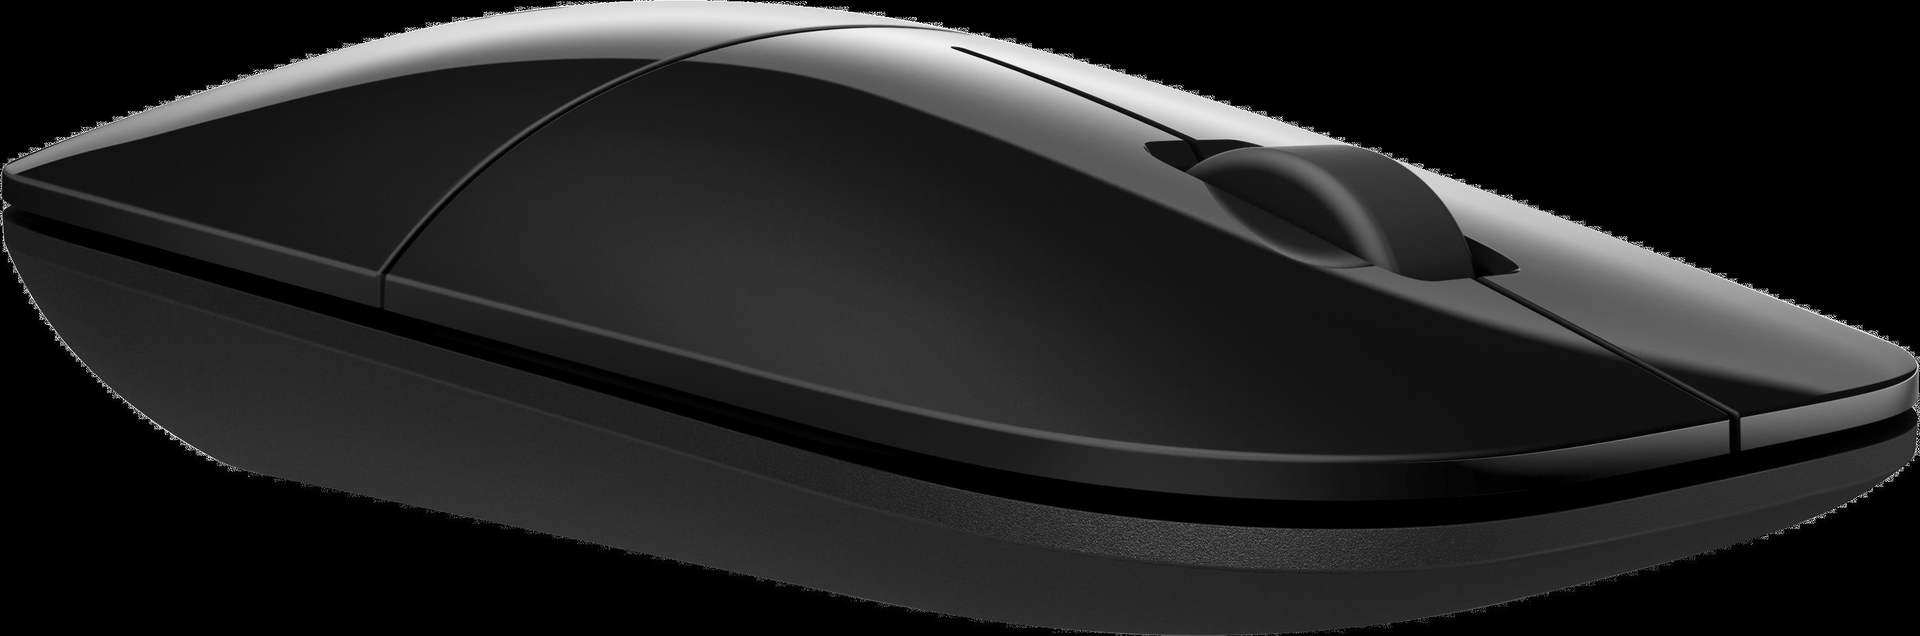 HP Inc. Z3700 BLACK WIRELESS EUROPE- IN LOCALIZATION ENGLISH MOUSE V0L79AA#ABB